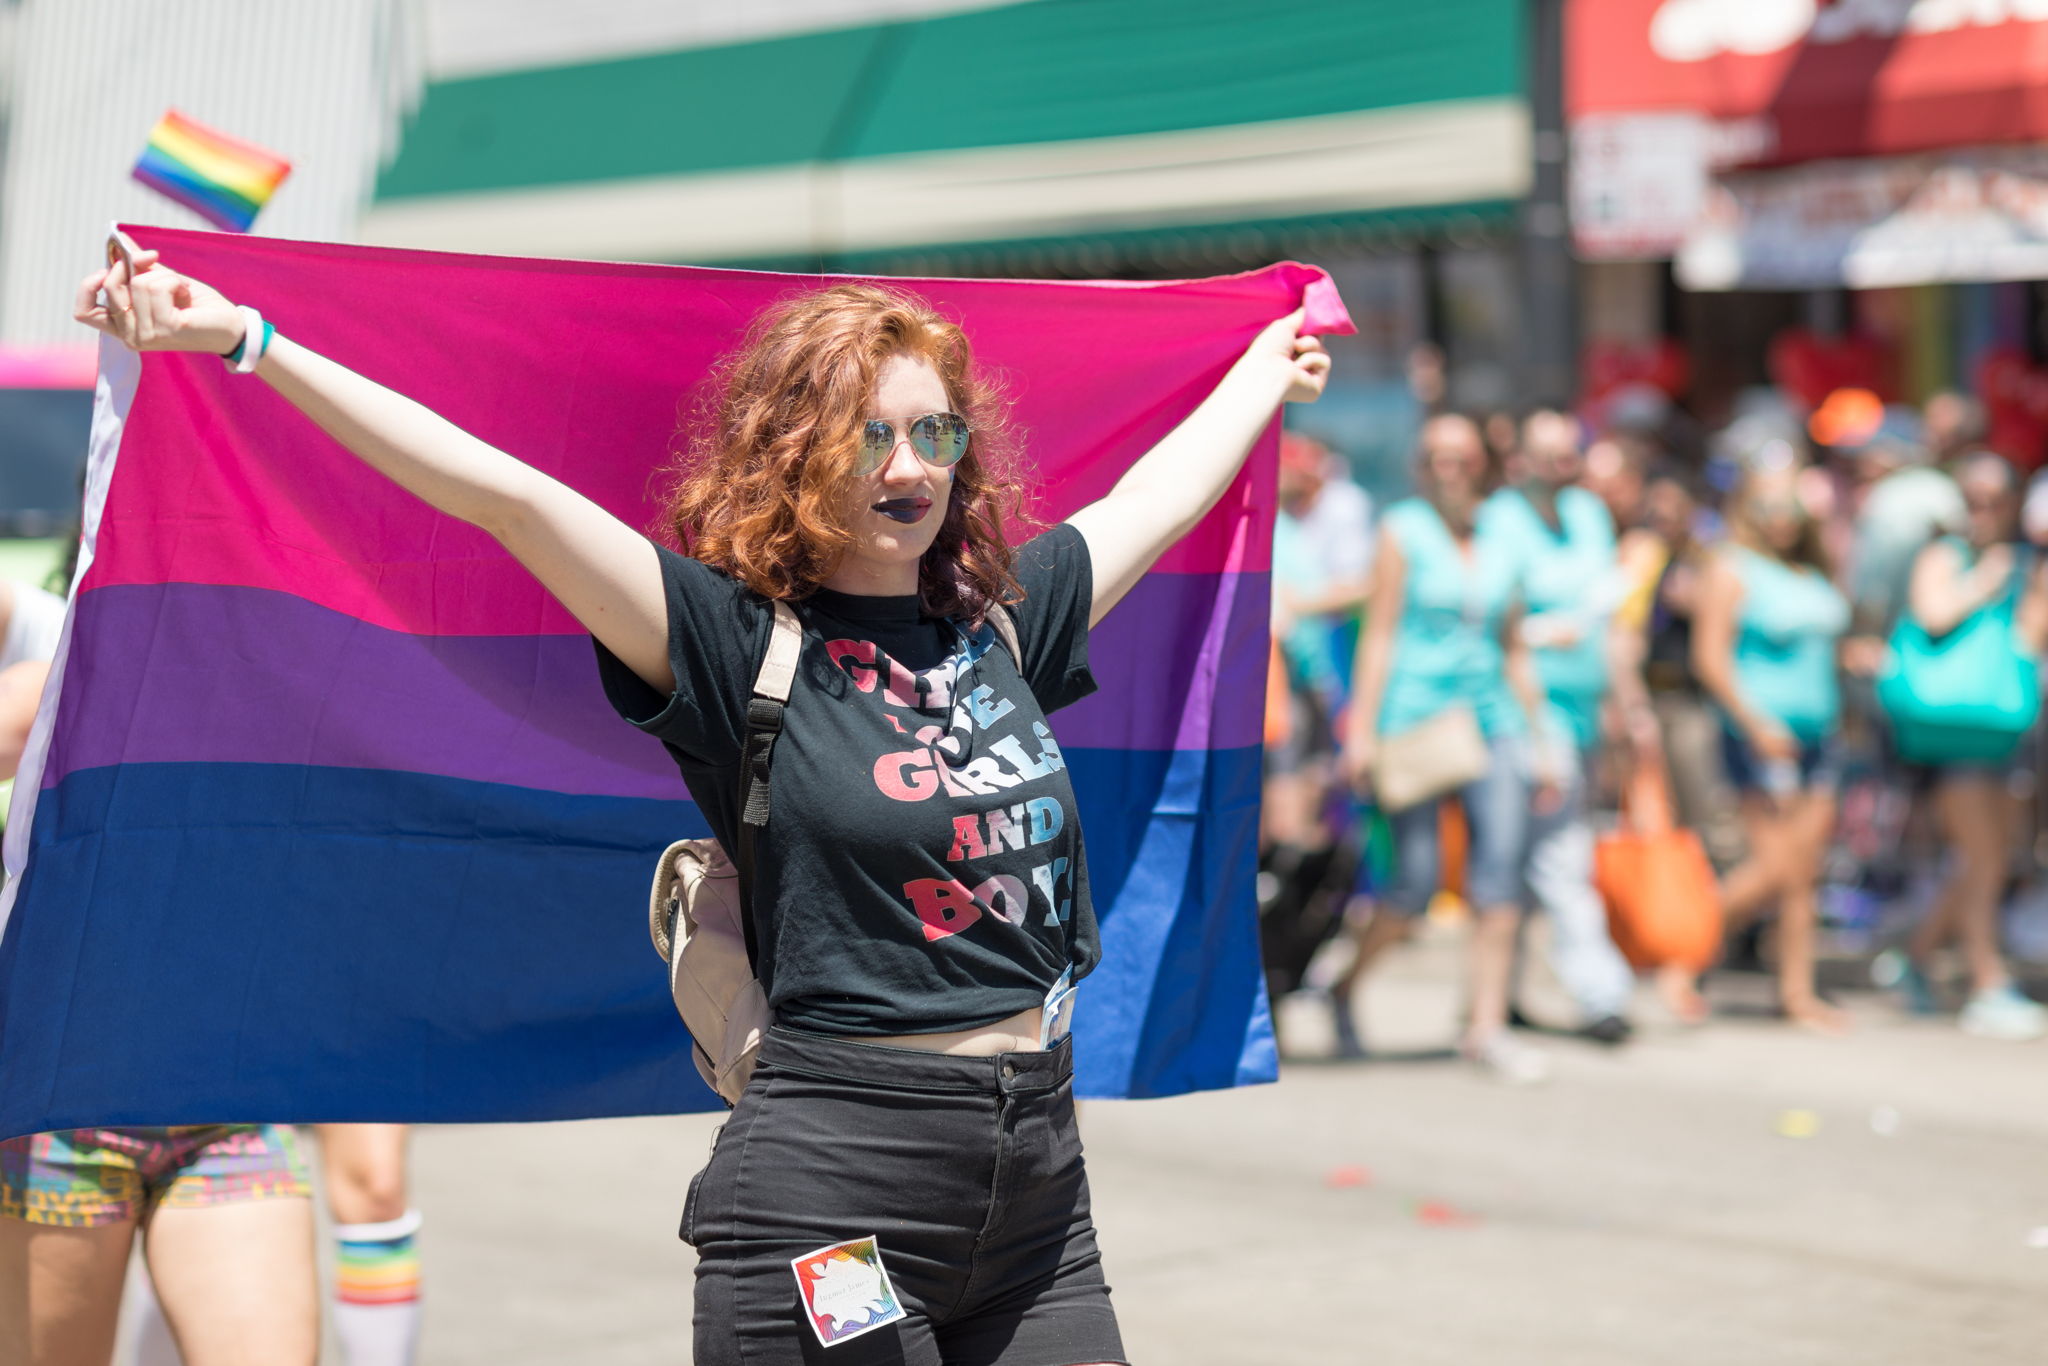 A woman with red hair holding the purple bi flag on her back and wears a shirt that says Girl Loves Girls and Boys during a pride march